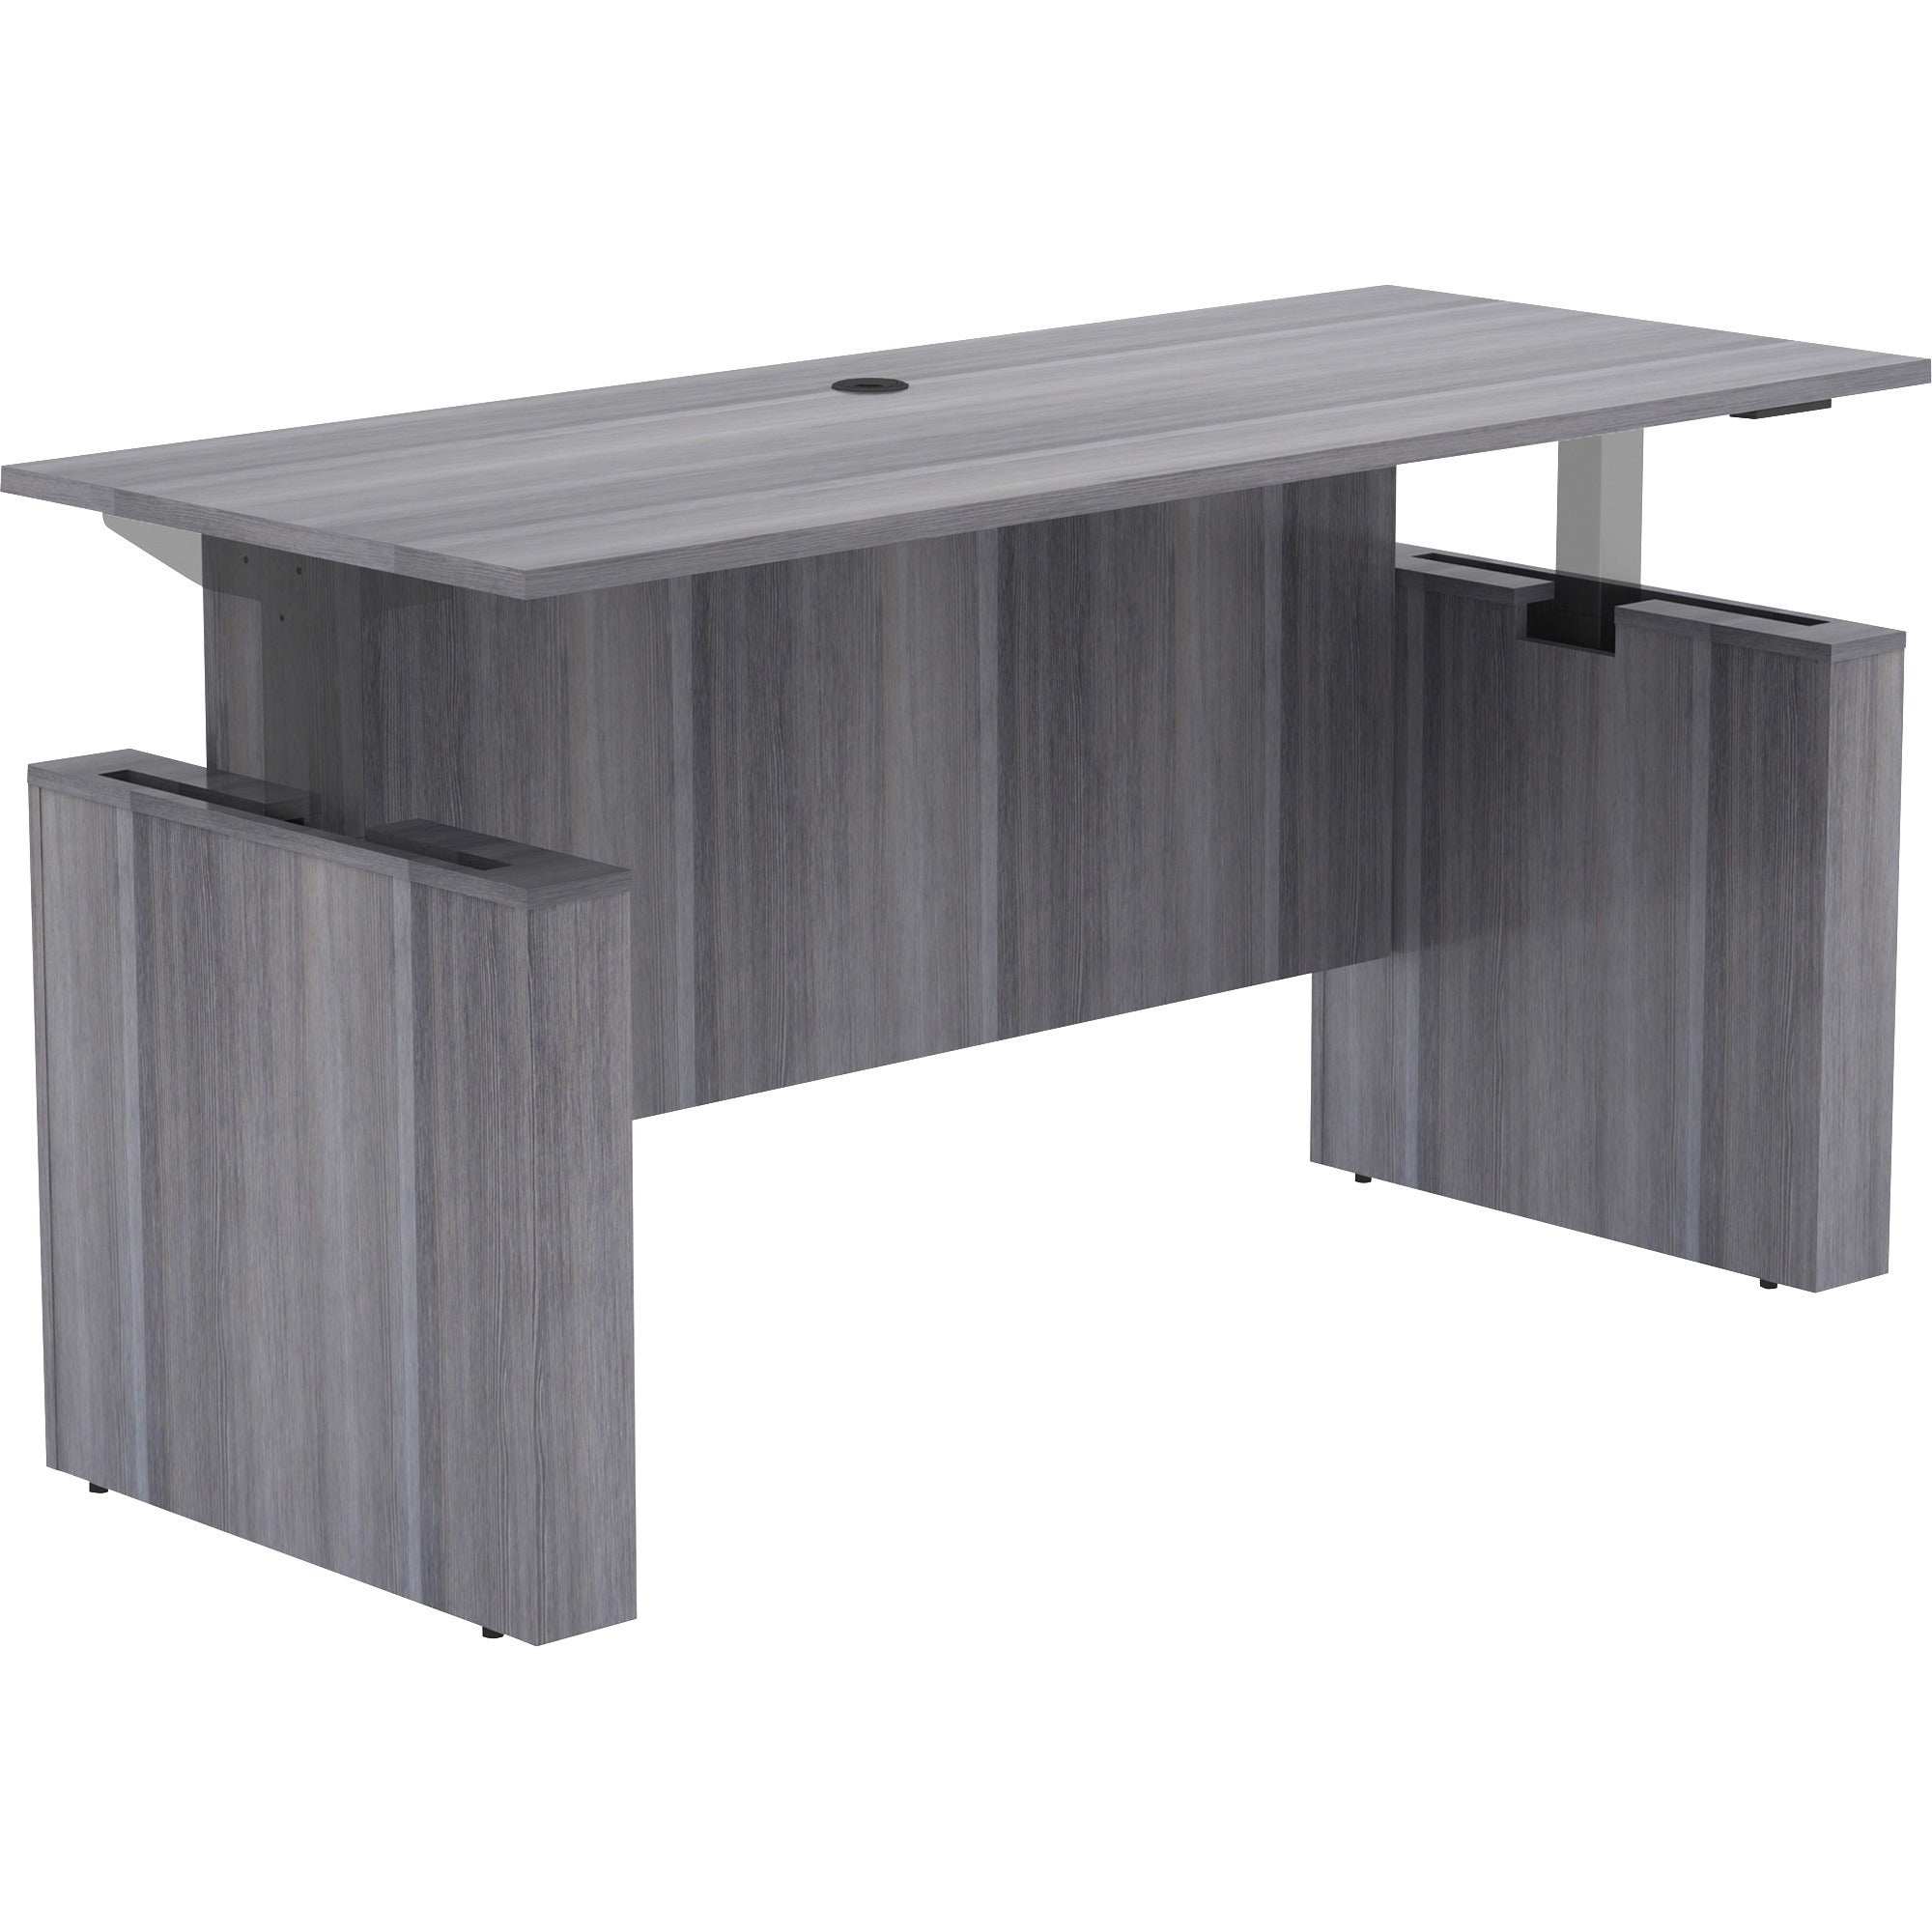 lorell-essentials-series-sit-to-stand-desk-shell-01-top-1-edge-72-x-2949-finish-weathered-charcoal-laminate-table-top_llr69578 - 1